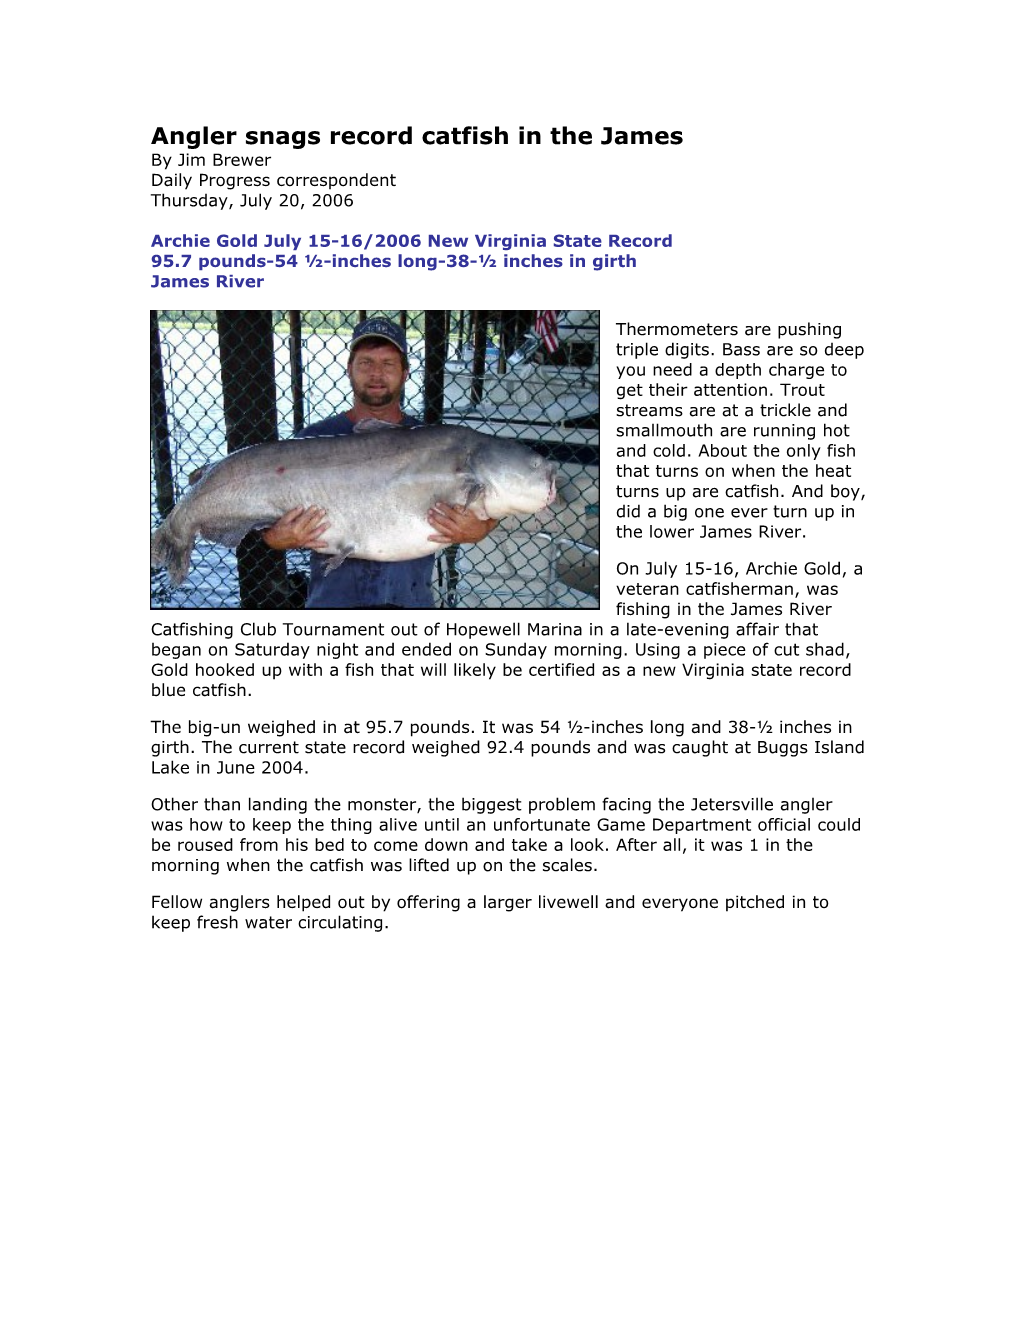 Angler Snags Record Catfish in the James